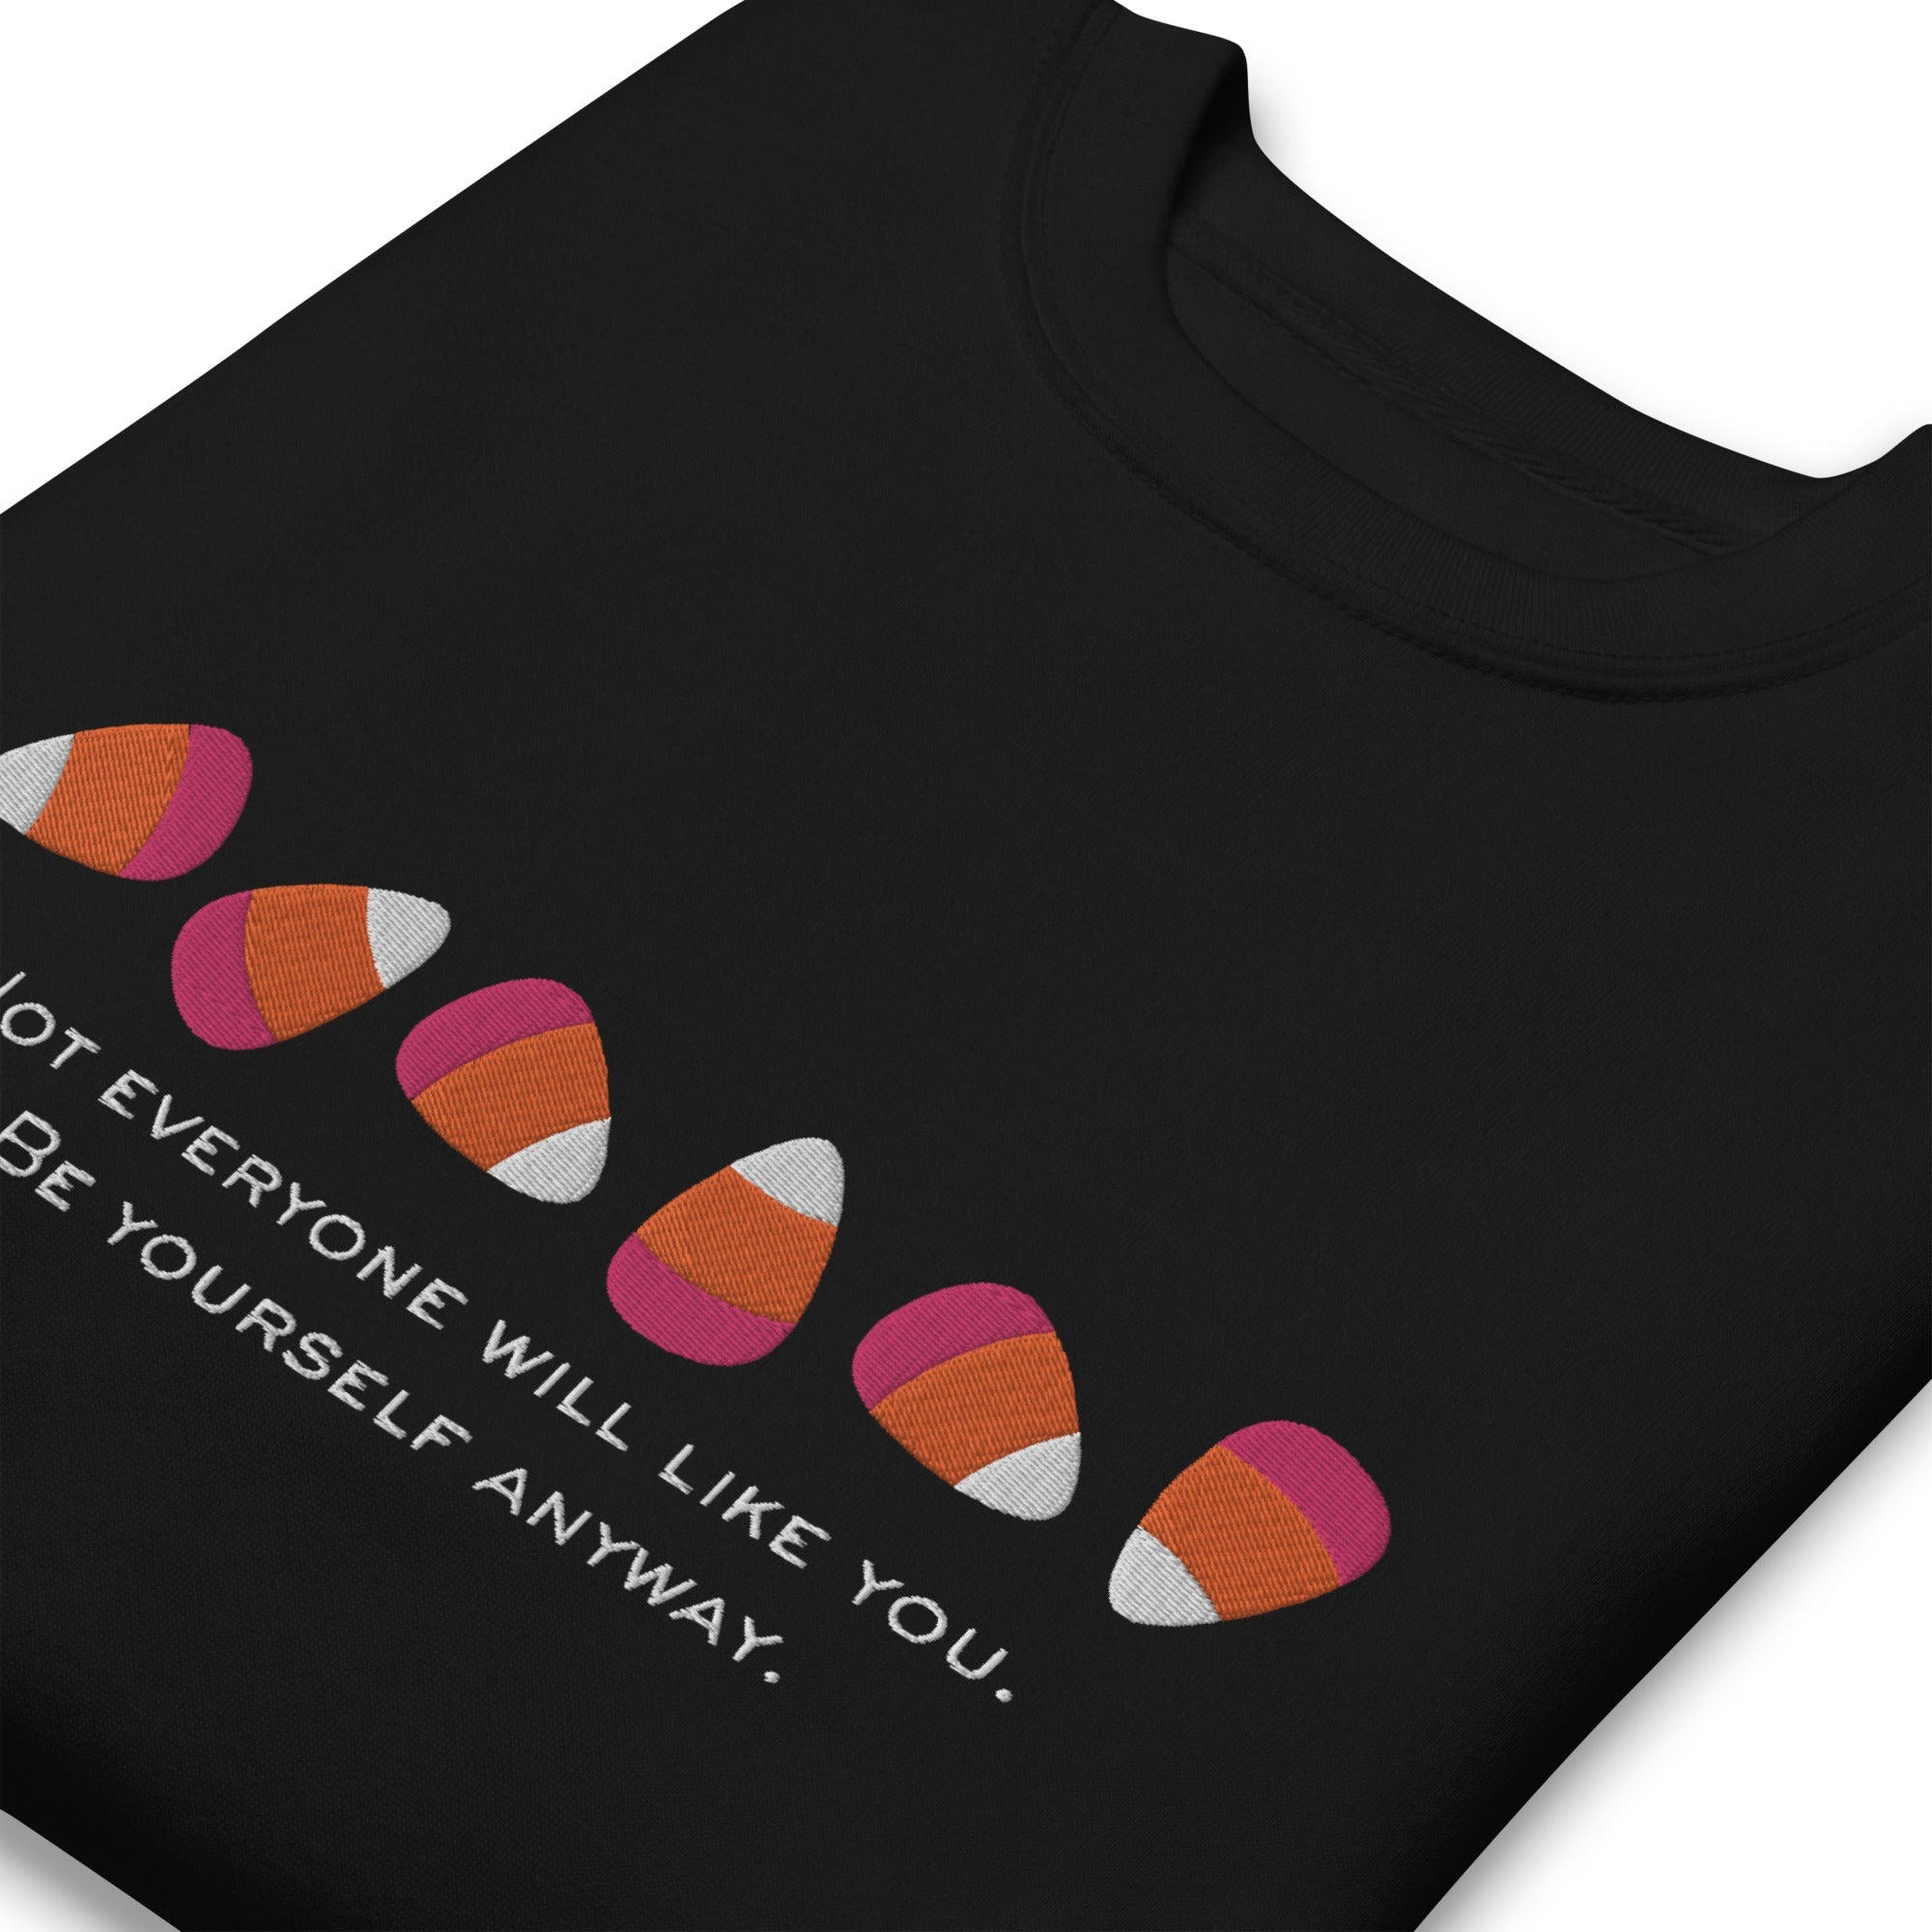 Candy Corn Not Everyone Will Like You Embroidered Premium Sweatshirt - The Kindness Cause